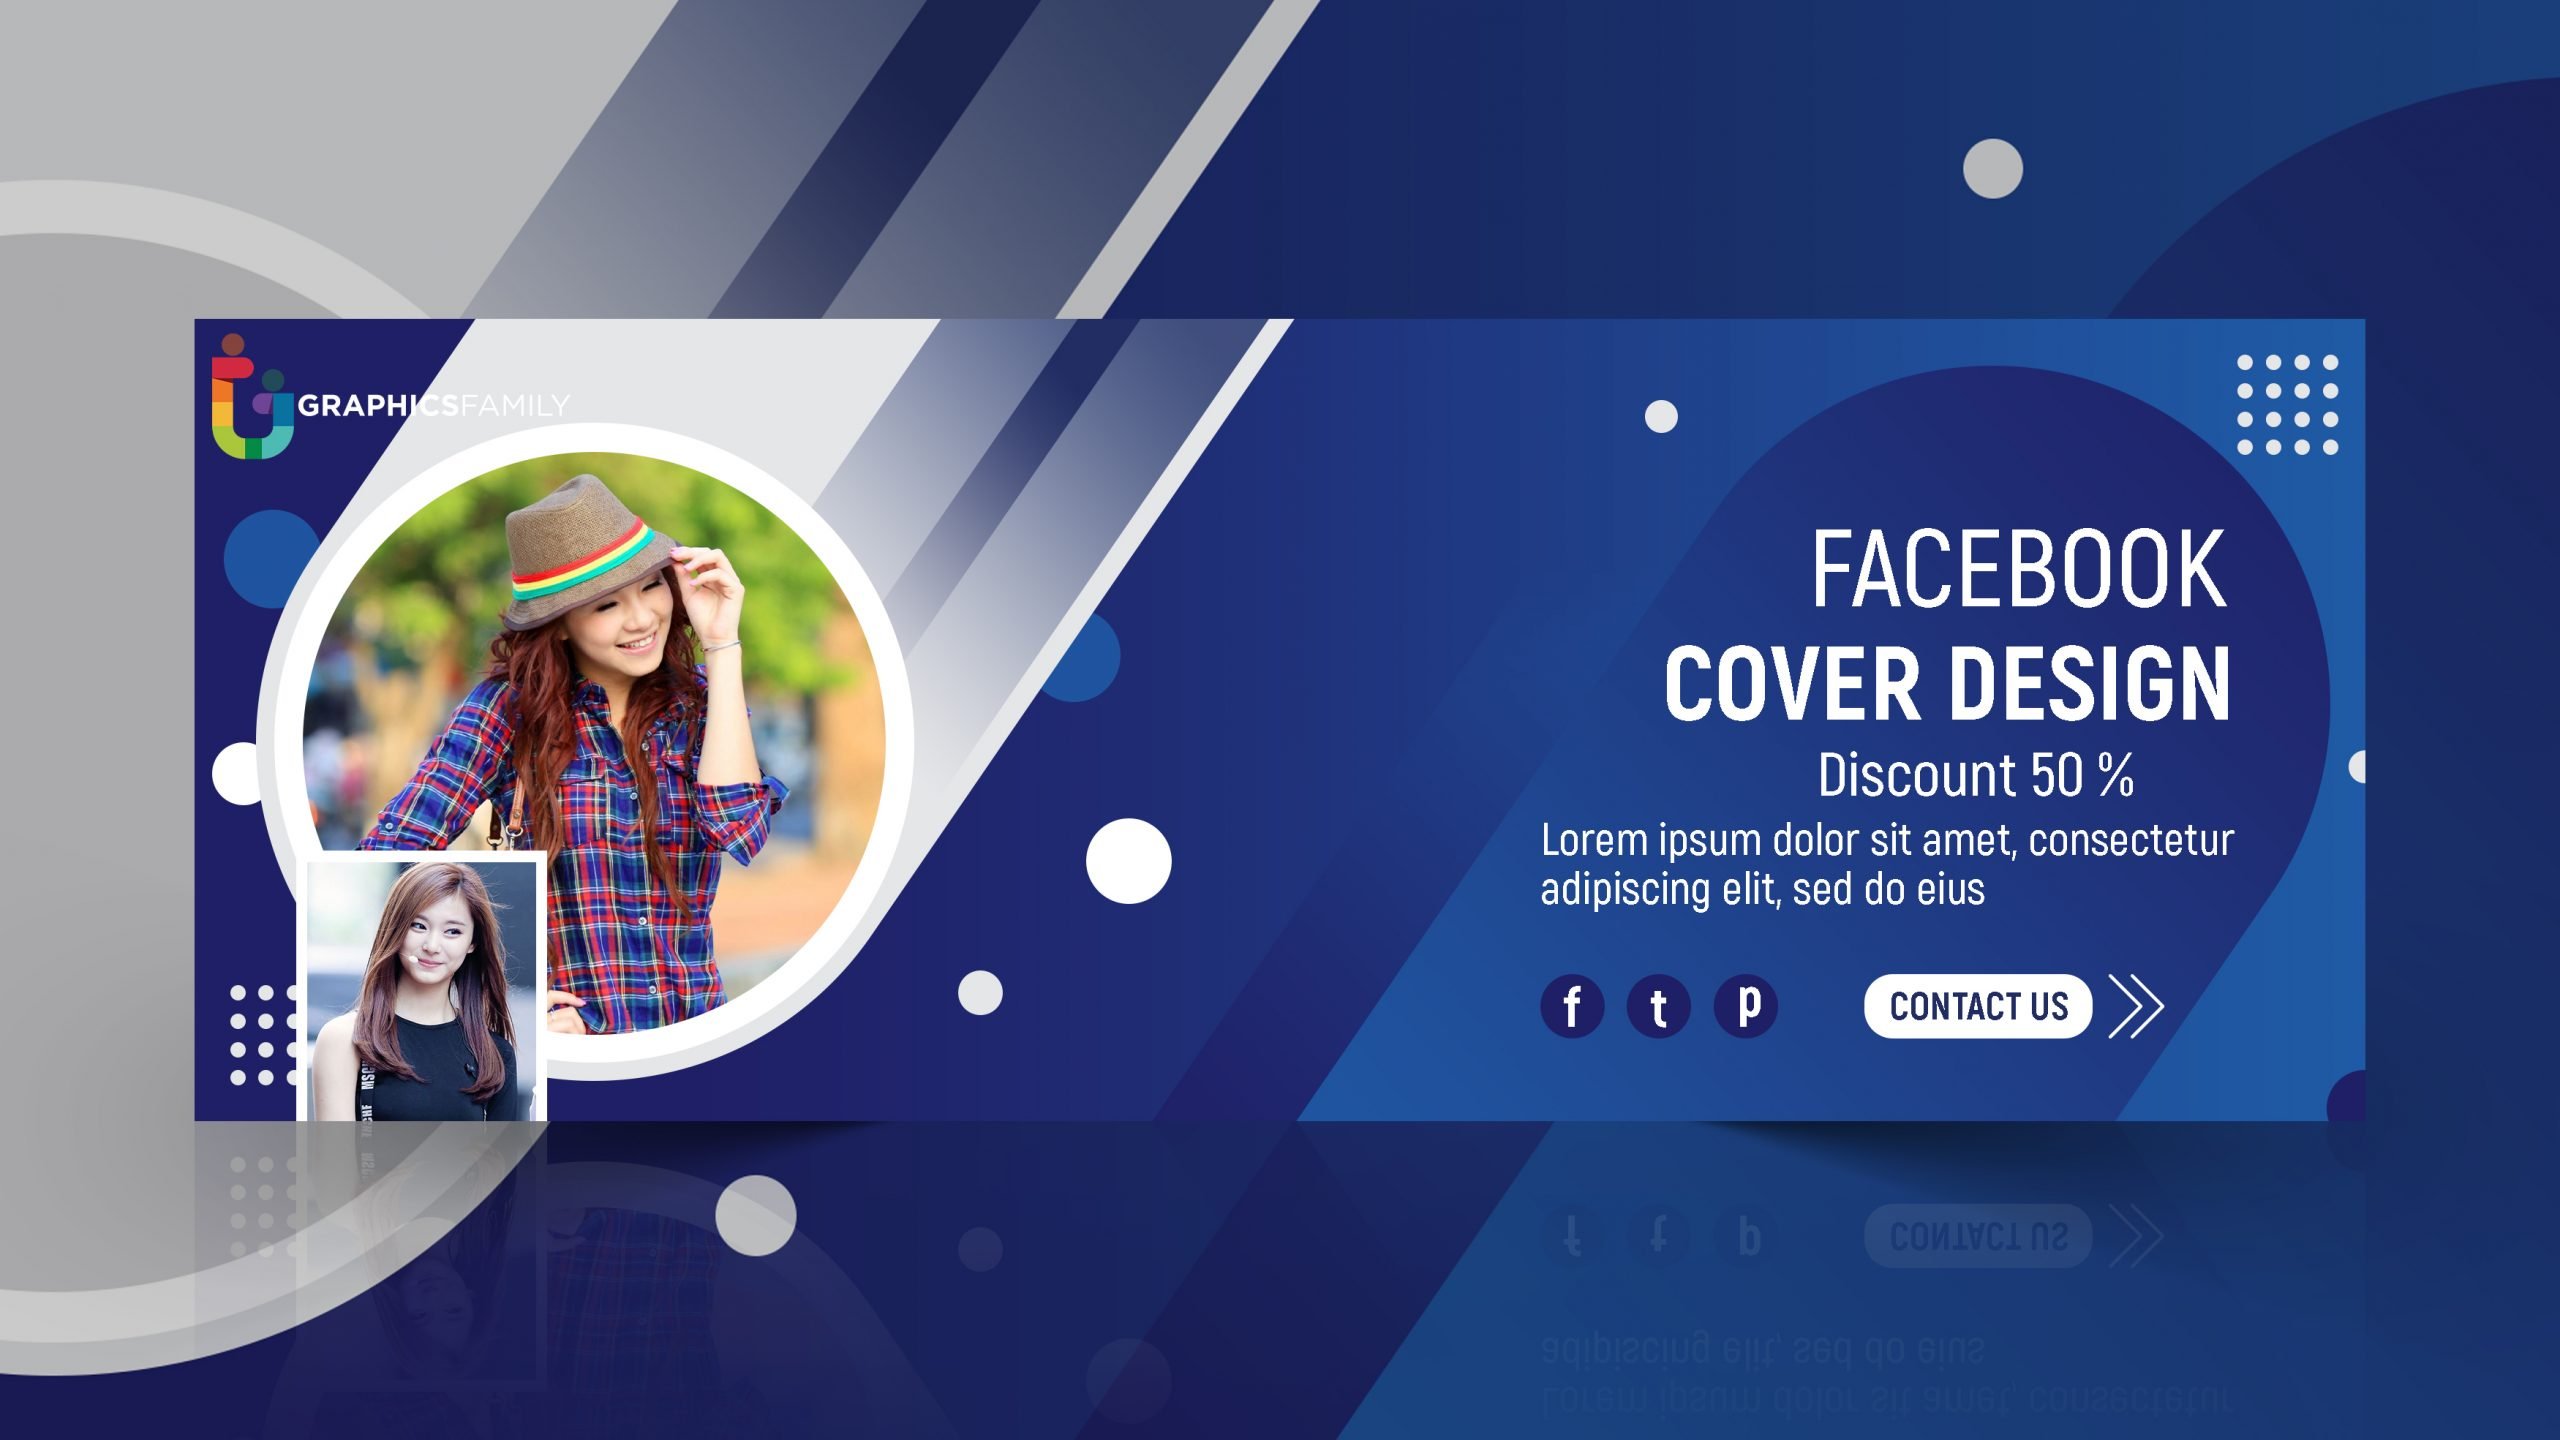 Download Abstract Facebook Cover Design Free psd Template - GraphicsFamily